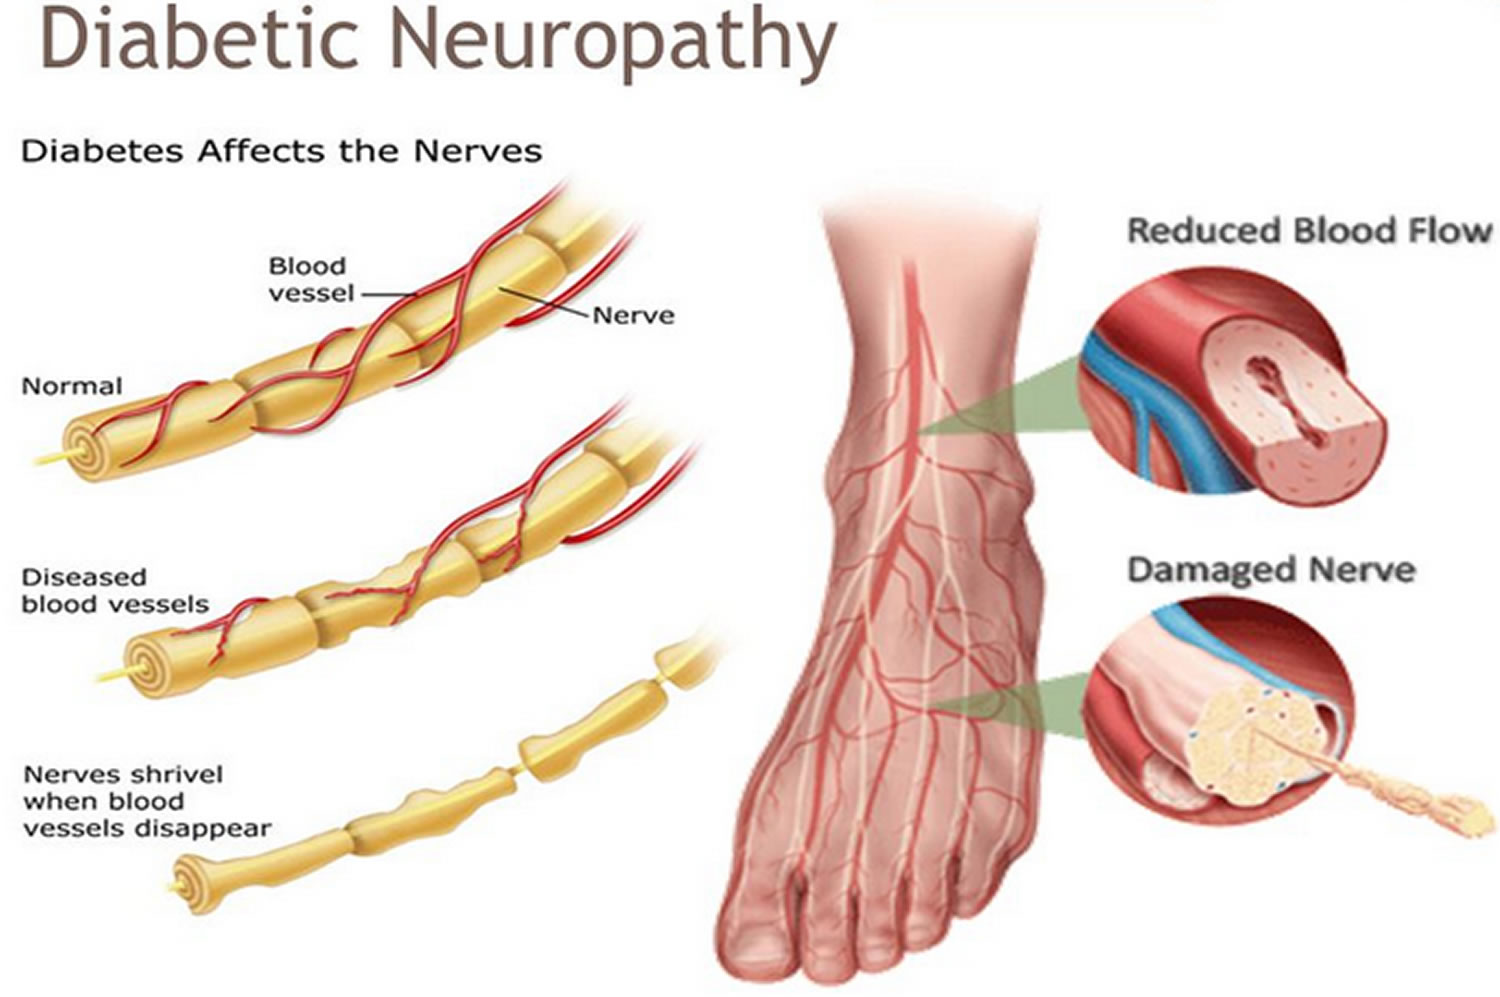 diabetic-neuropathy-causes-symptoms-signs-medications-treatment